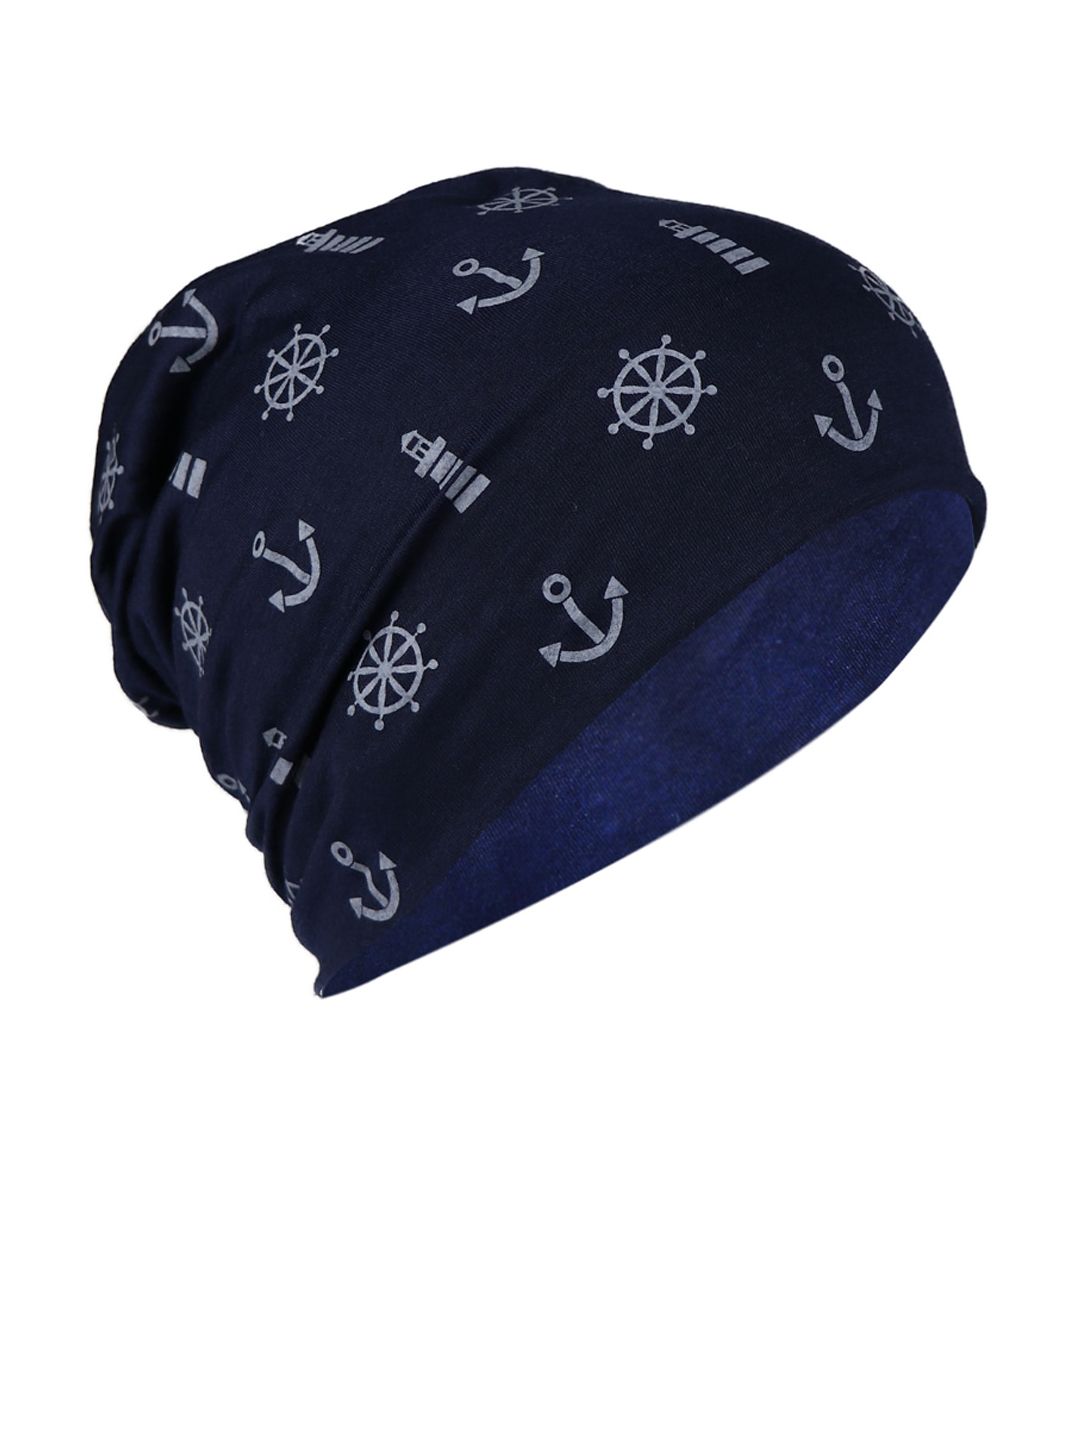 iSWEVEN Unisex Navy Blue & Grey Printed Beanie Price in India